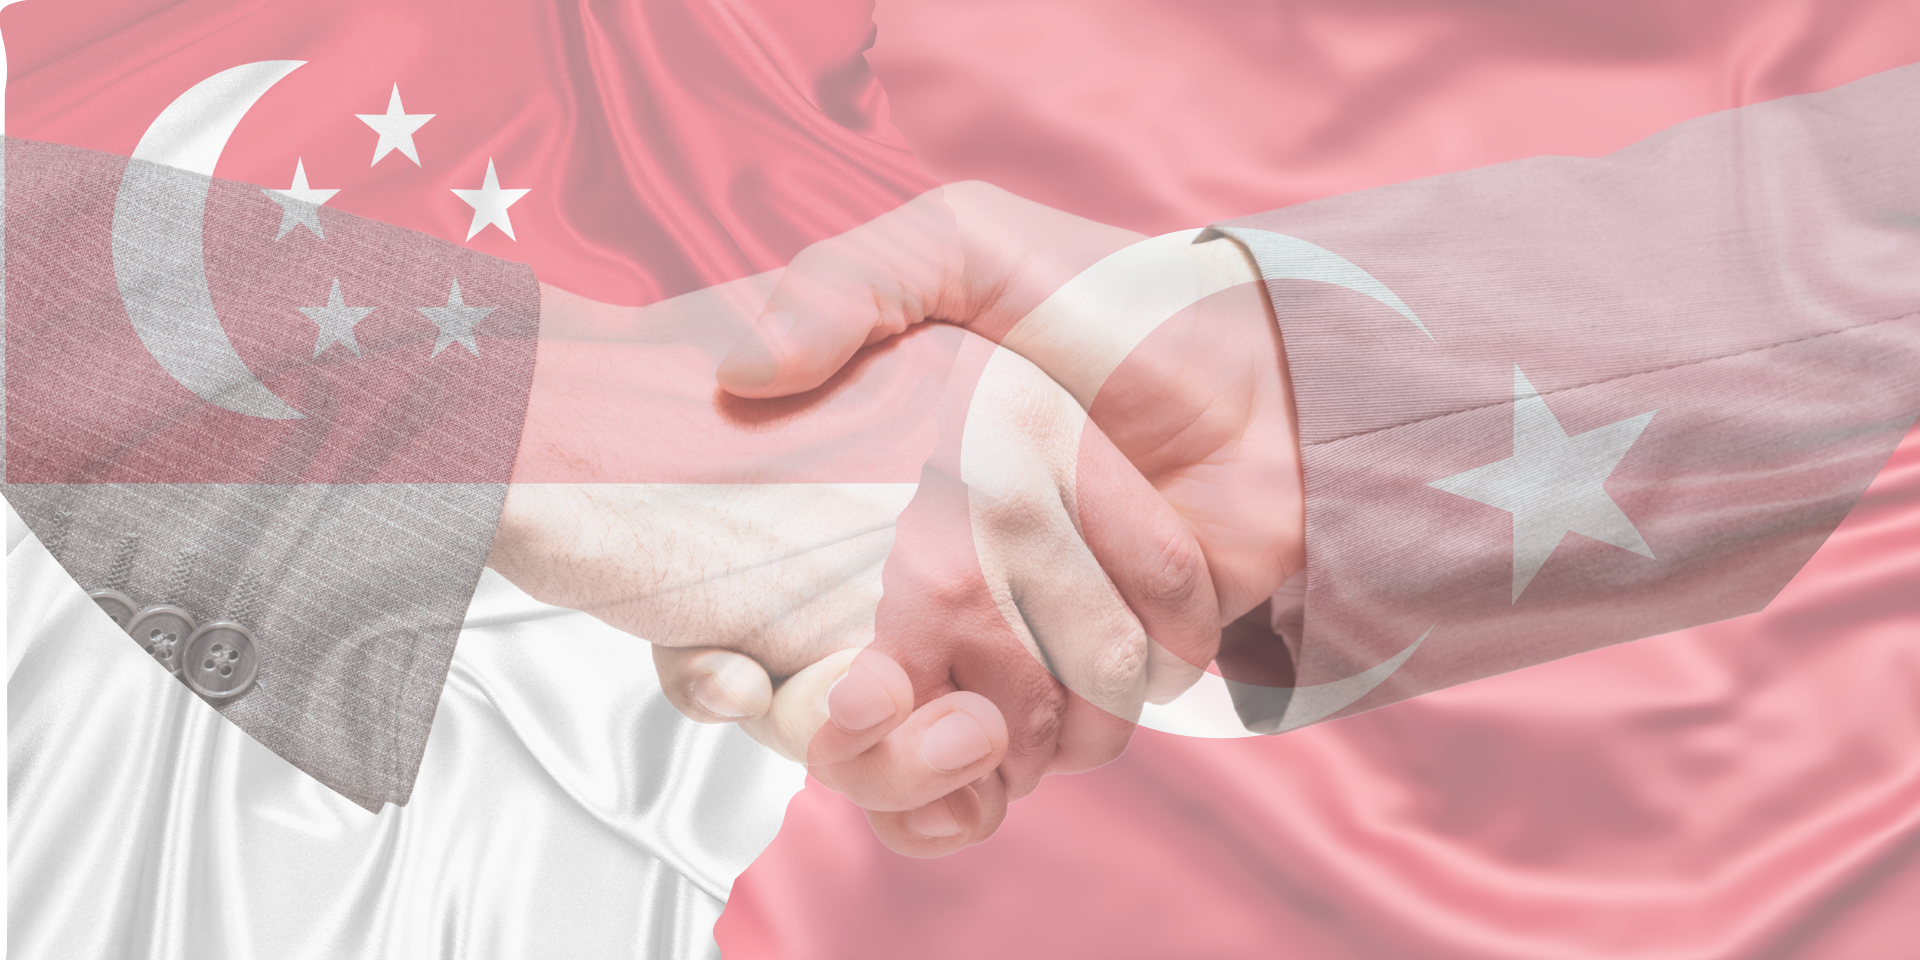 thumbnails International Mediation On The Rise: A Sharing of Singapore and Türkiye Perspectives